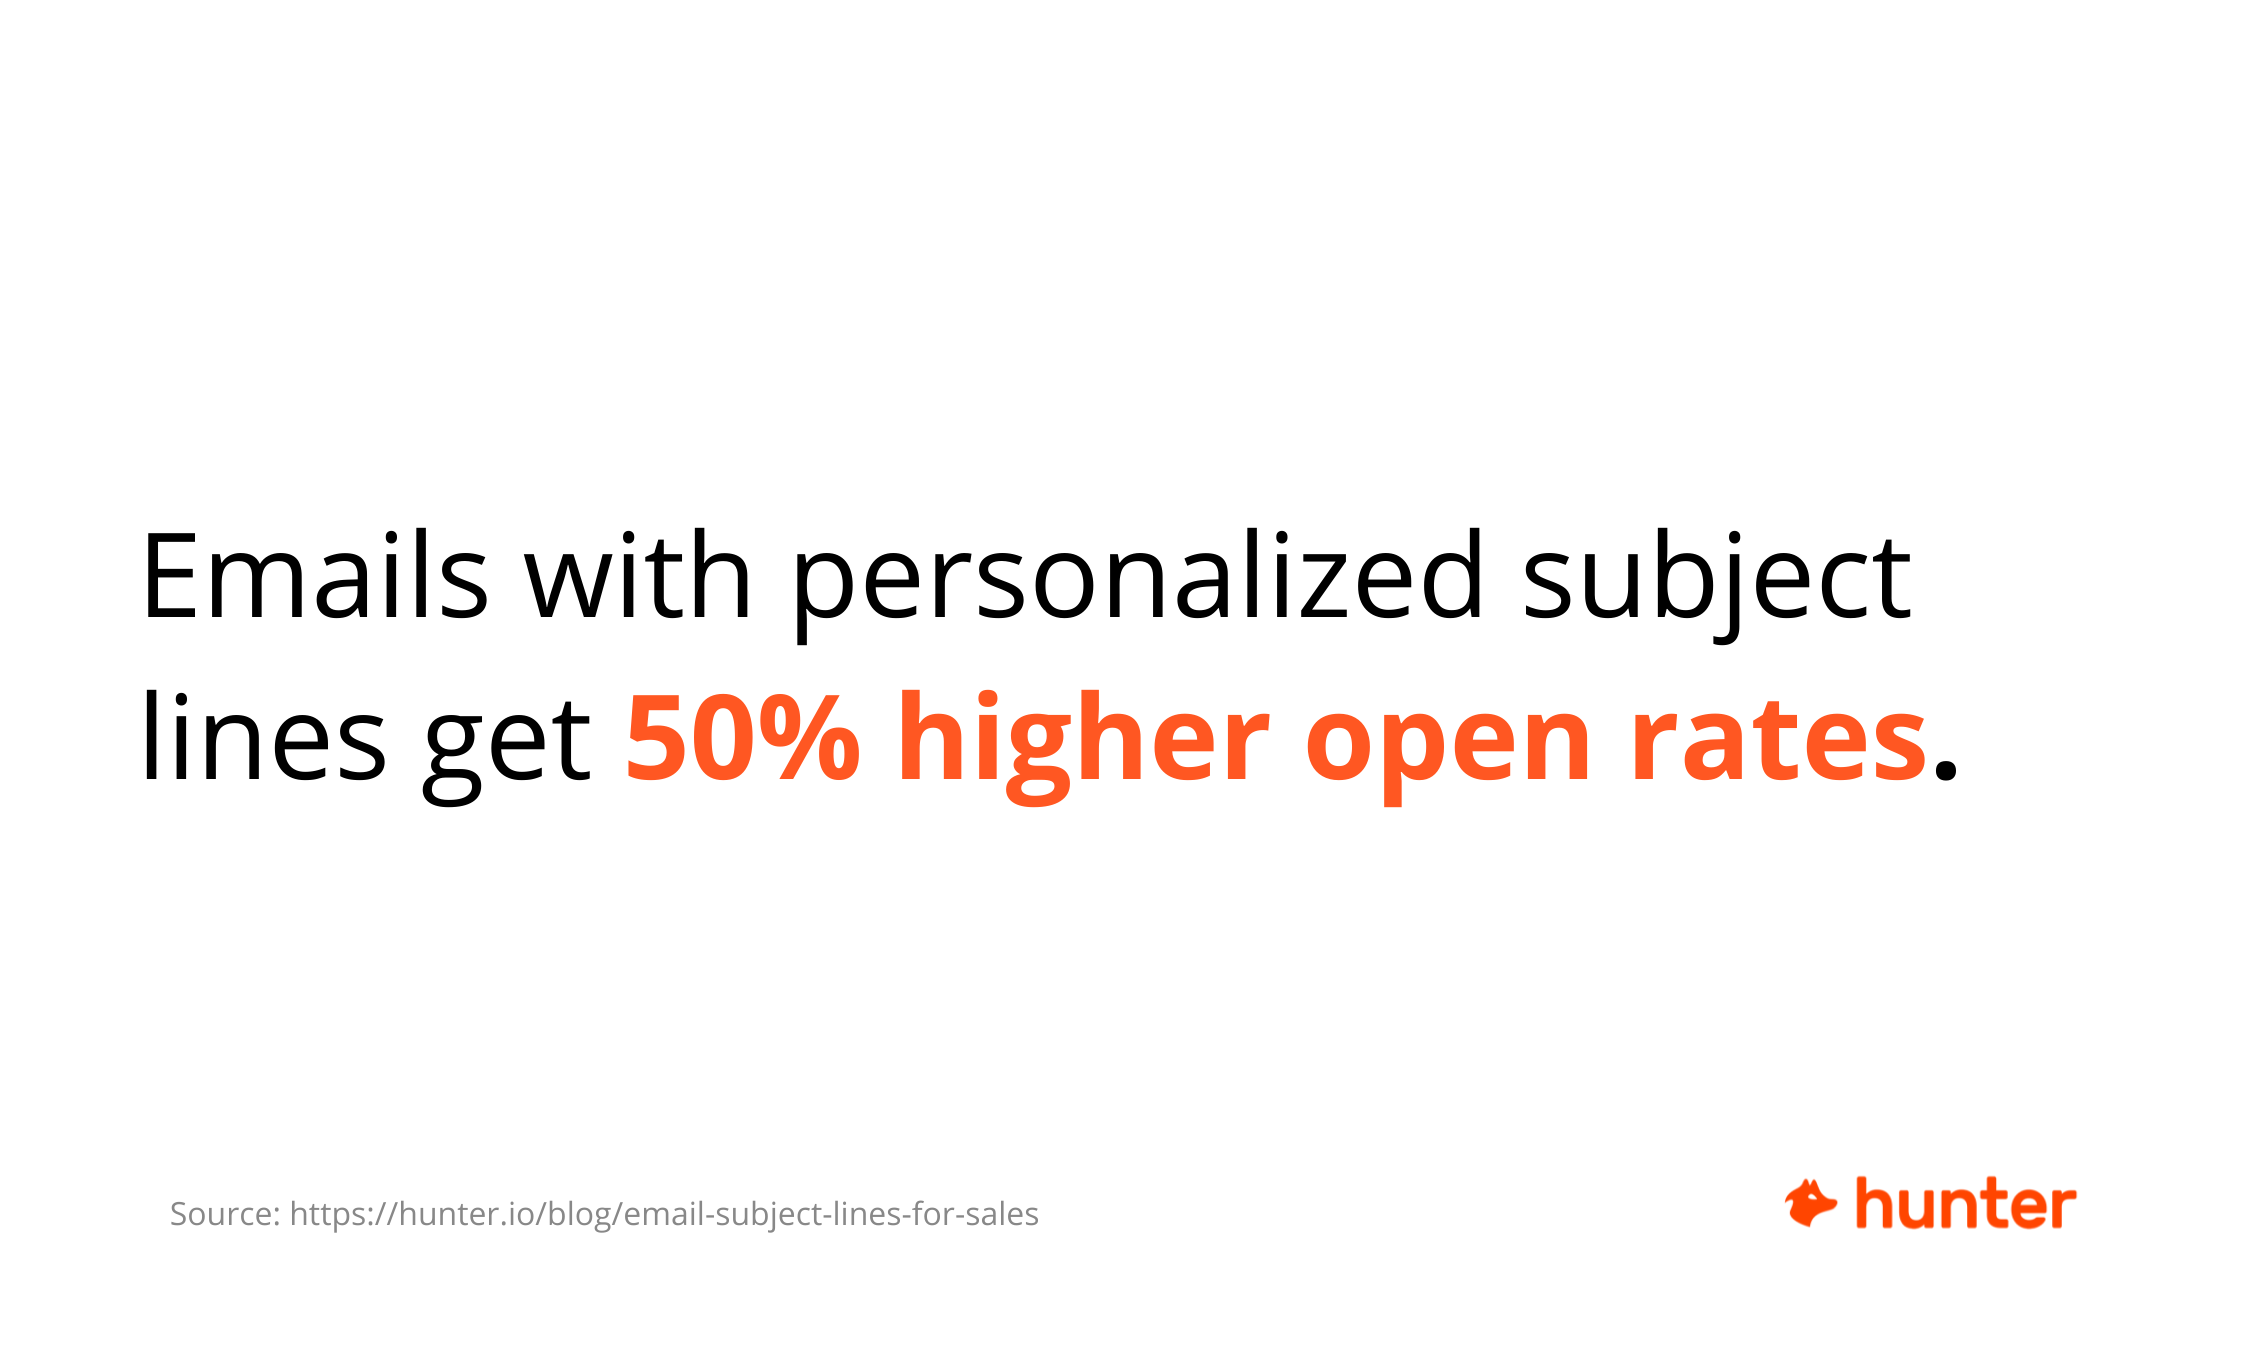 Emails with personalized subject lines get higher open rates